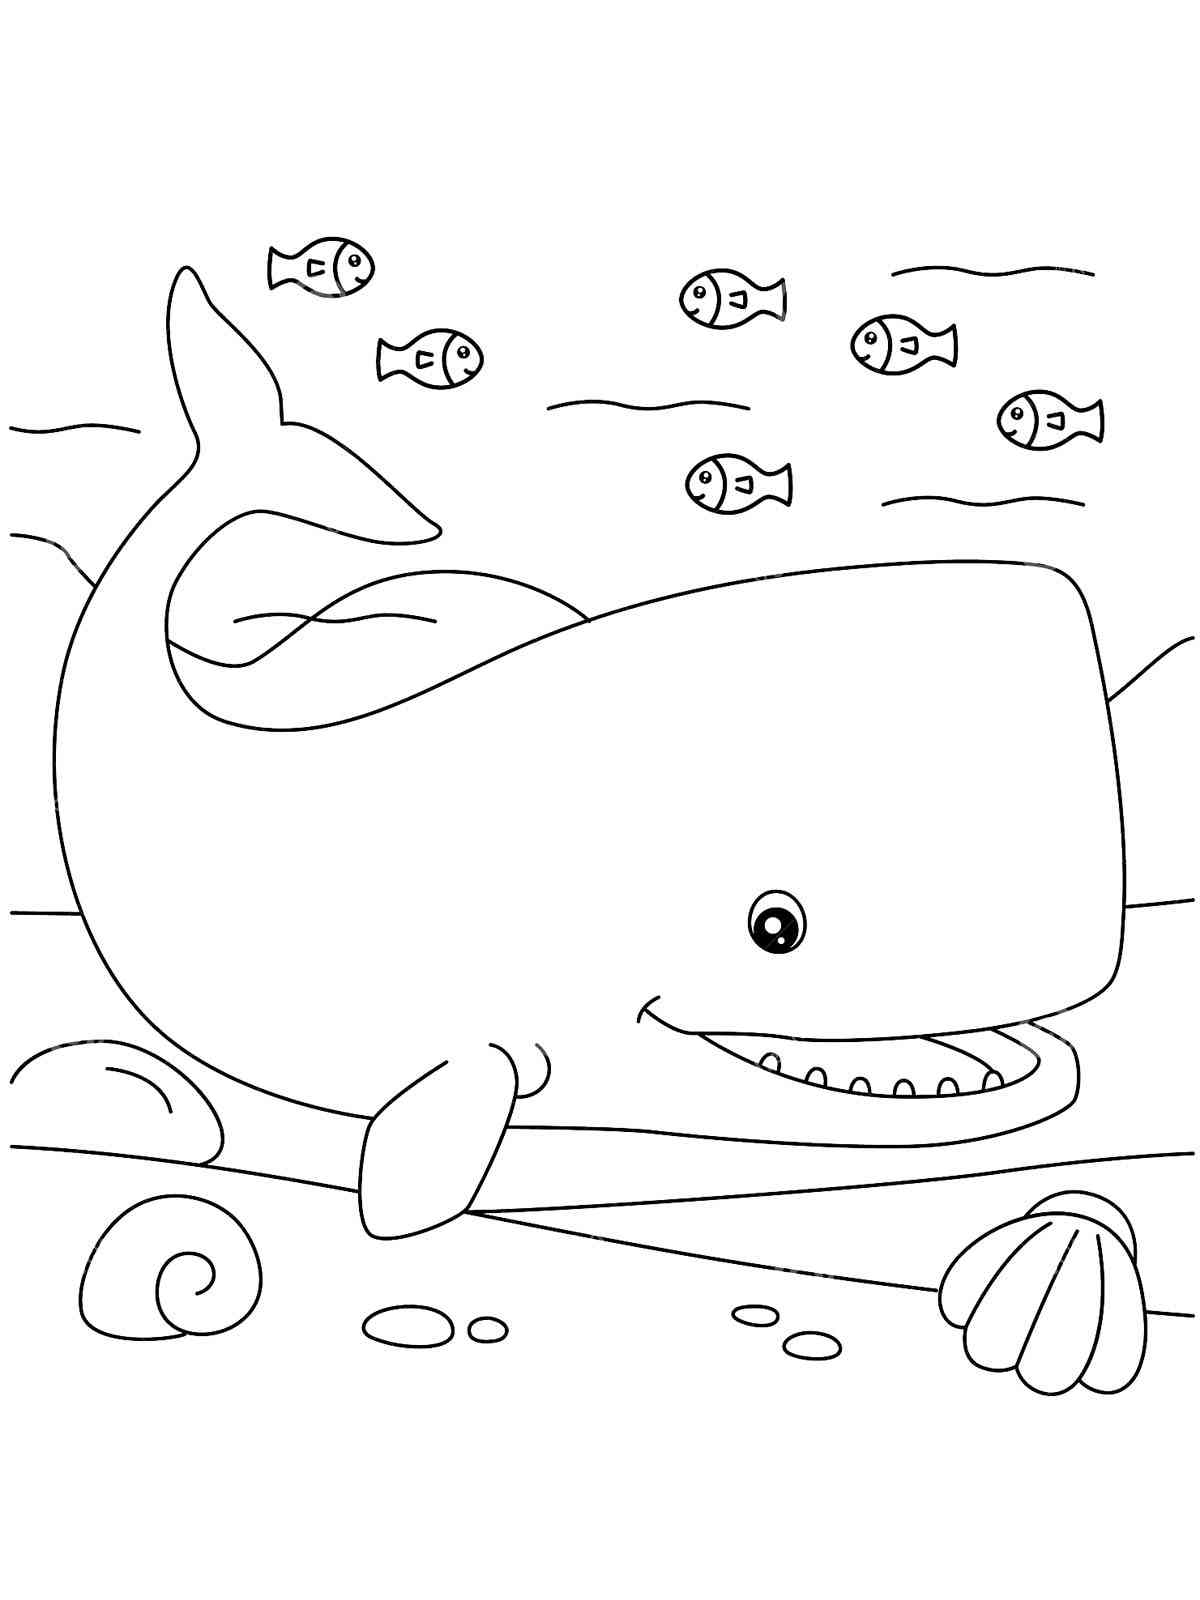 Cachalot underwater coloring page